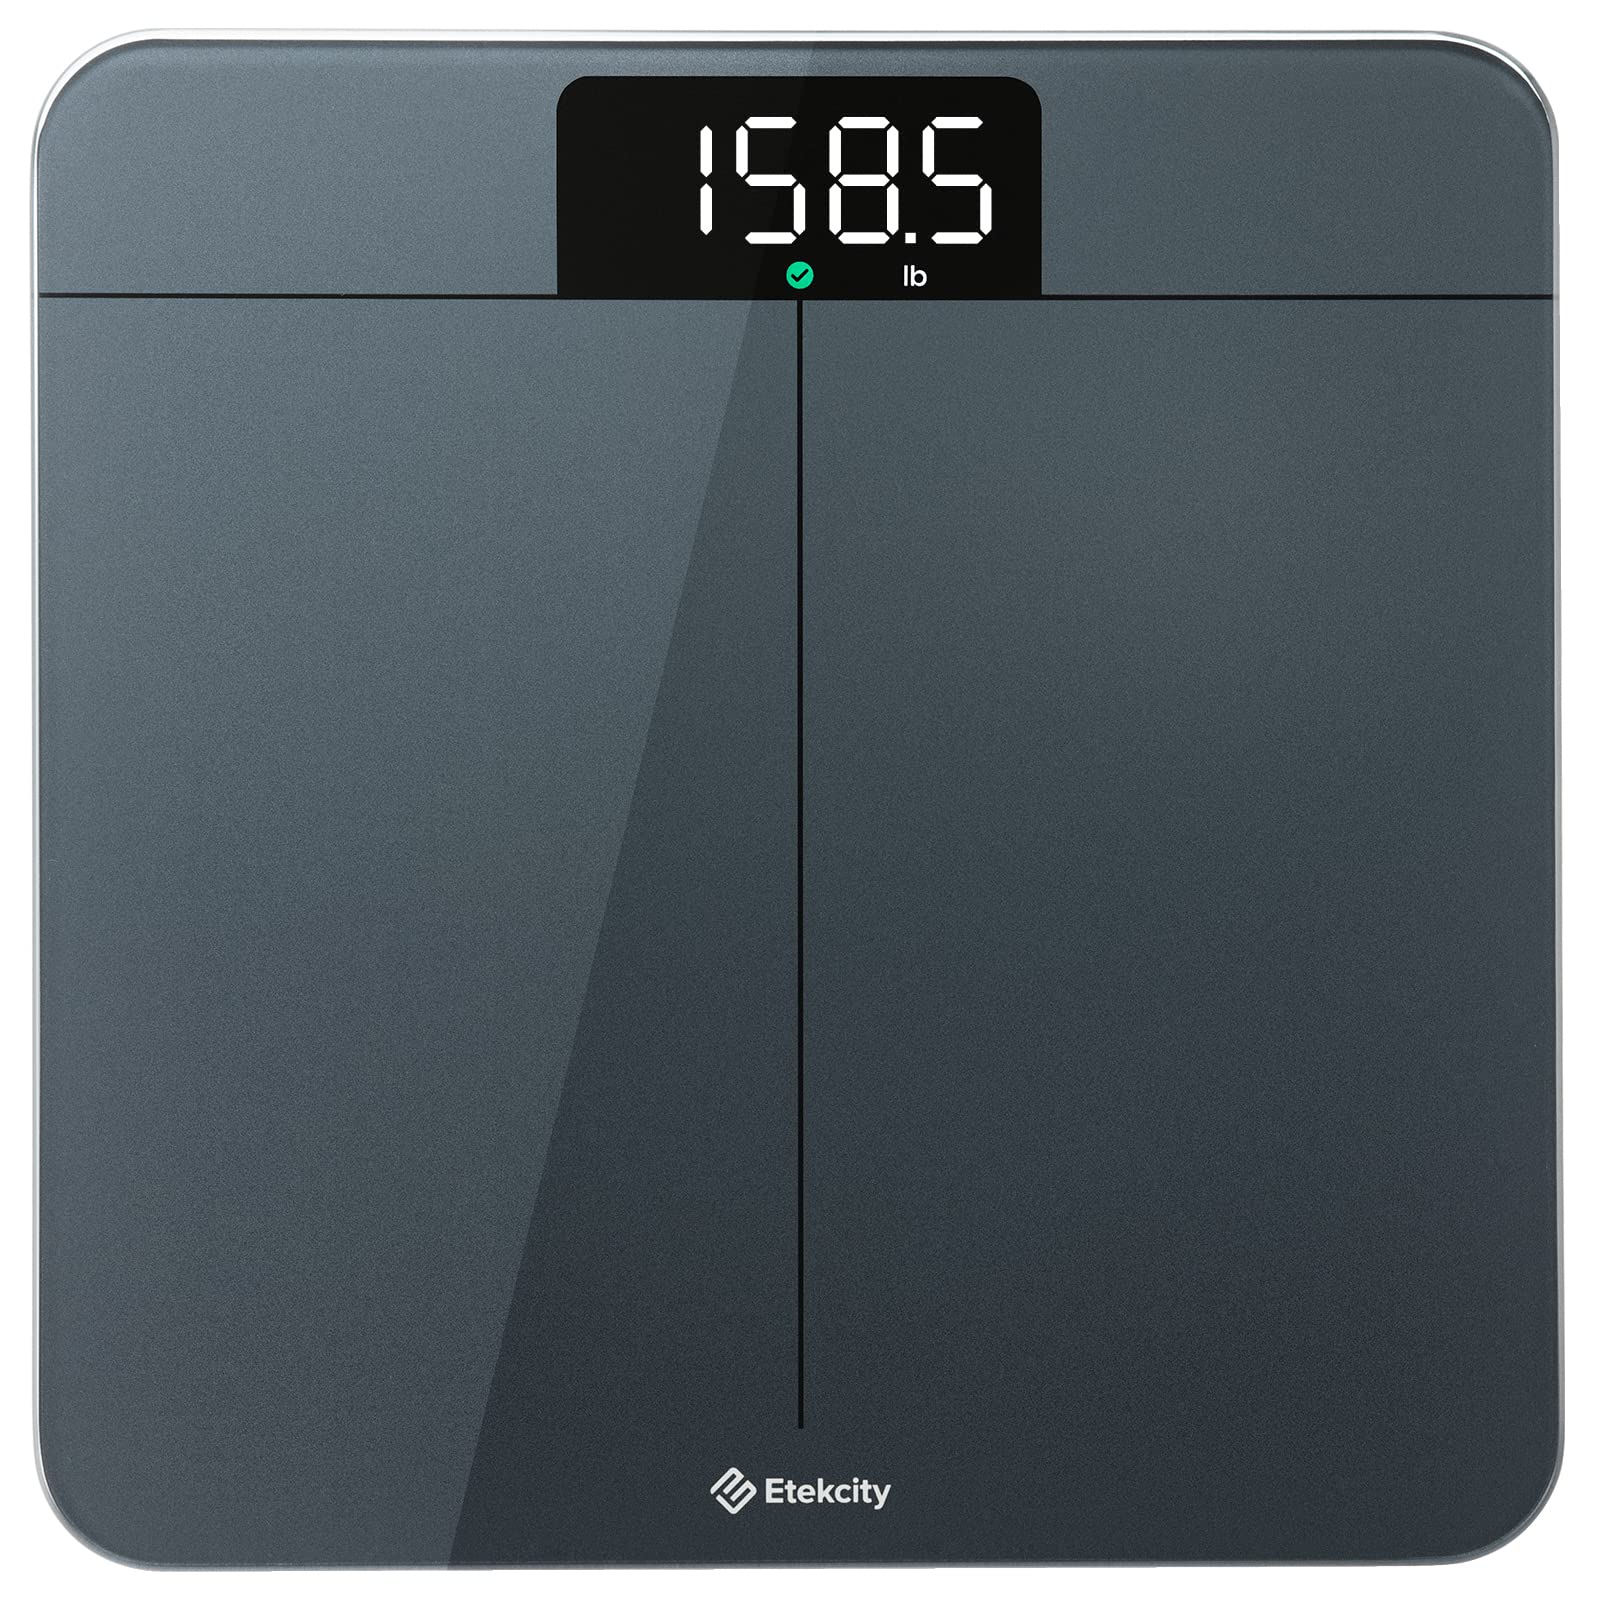 Weight Scales Digital Body Scales Bathroom Floor Scales High Quality  Tempered Glass Electronic Scales For People Weighing LED